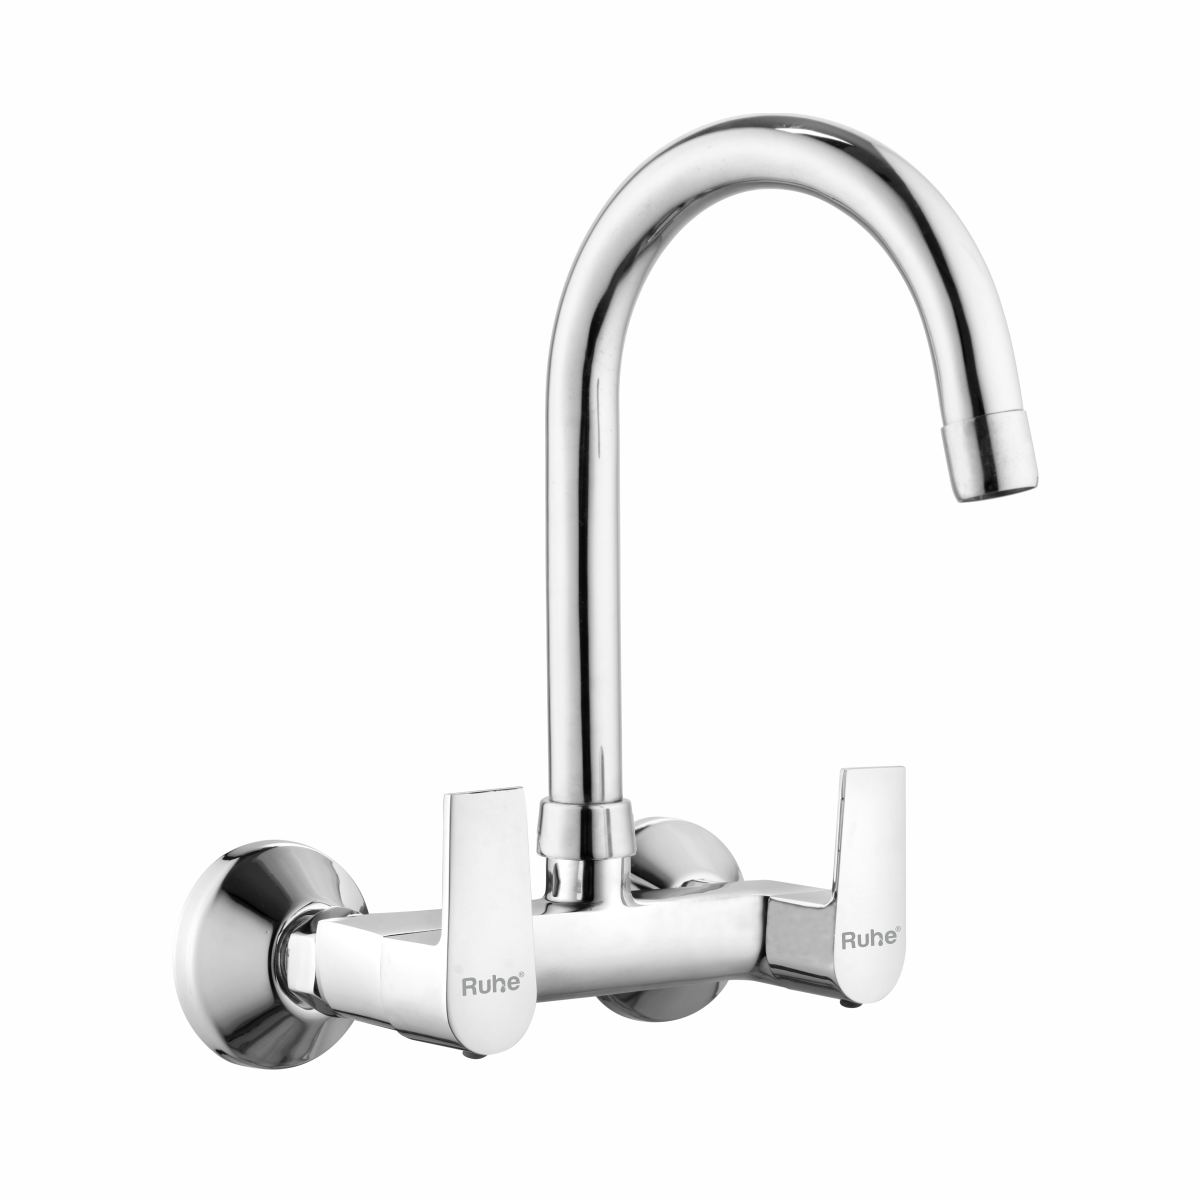 Elixir Sink Mixer with Medium (15 inches) Round Swivel Spout Faucet